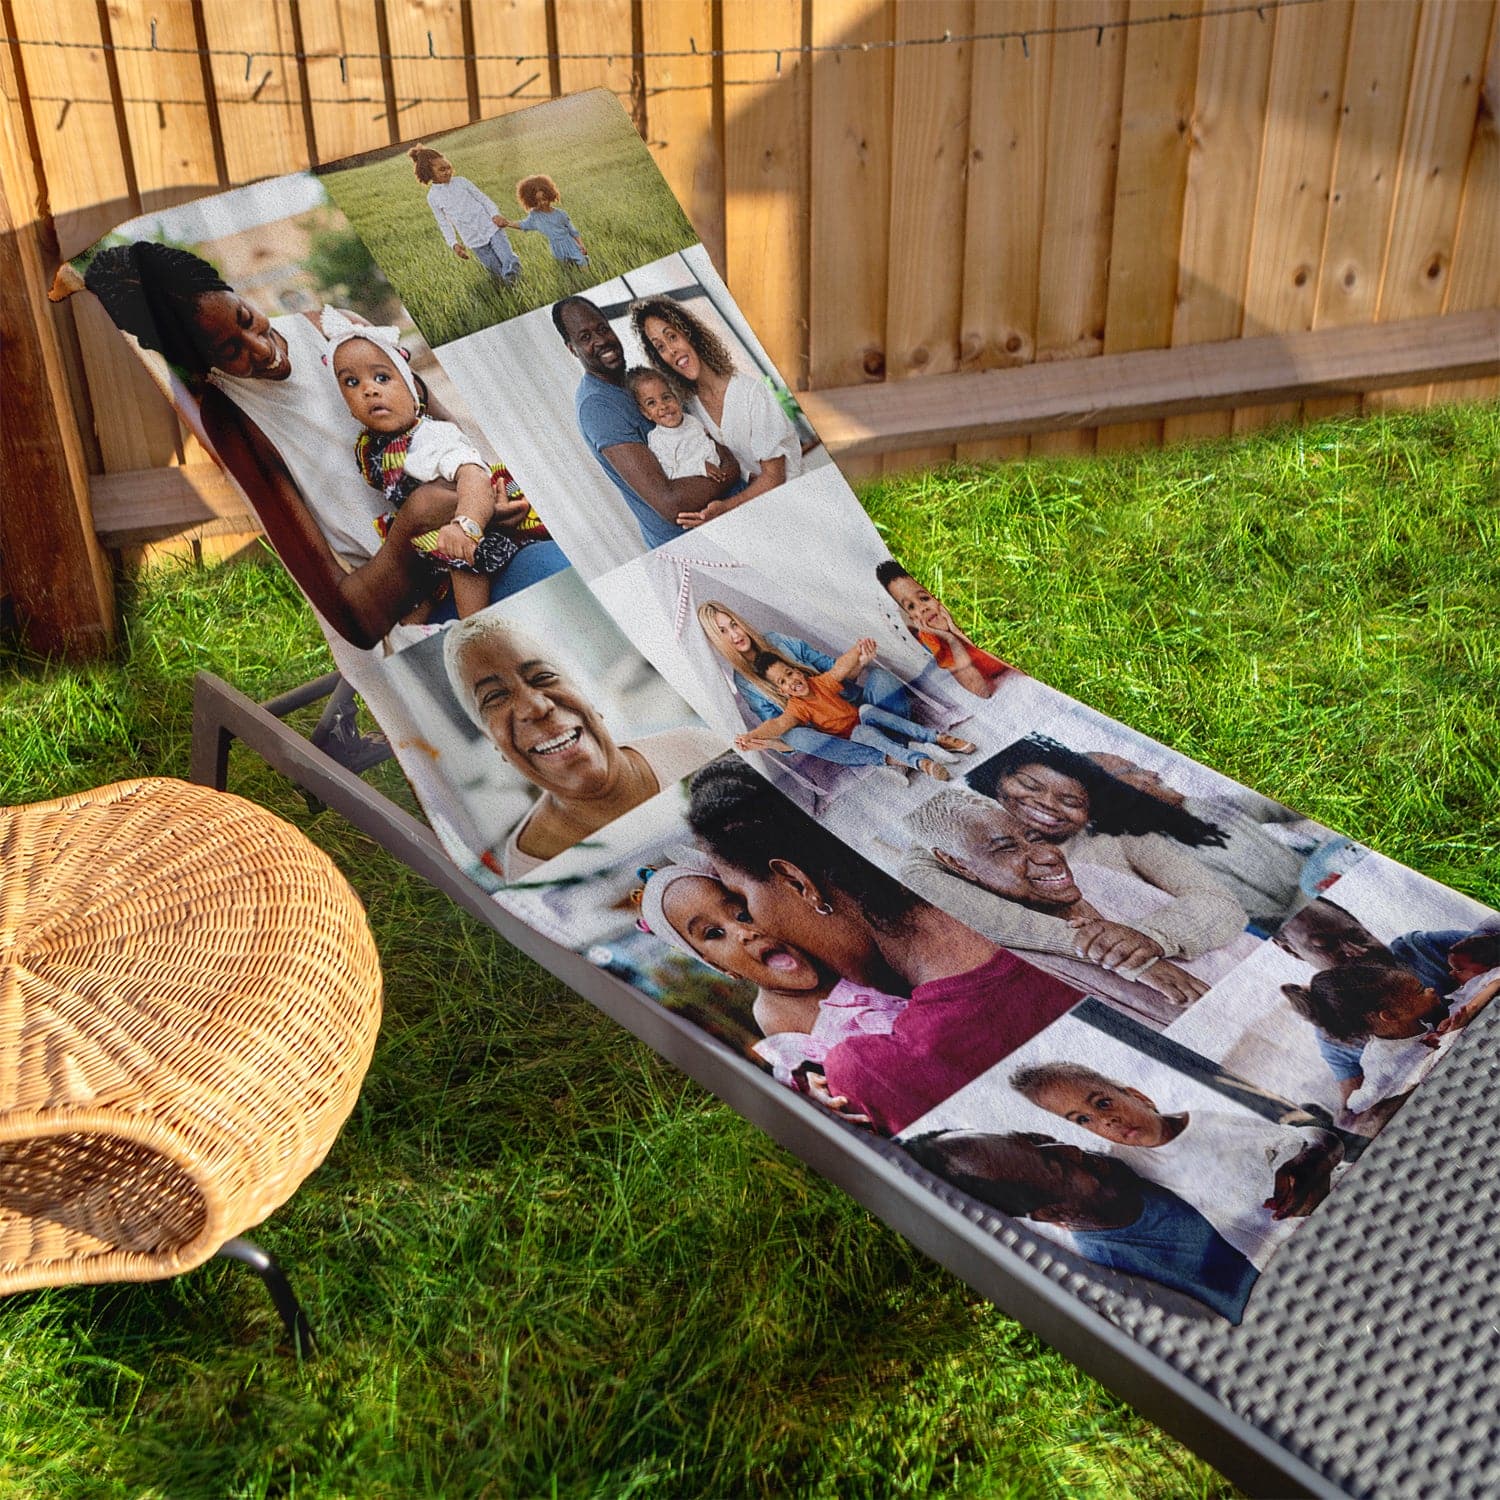 Personalised Beach Towel - Photo Collage